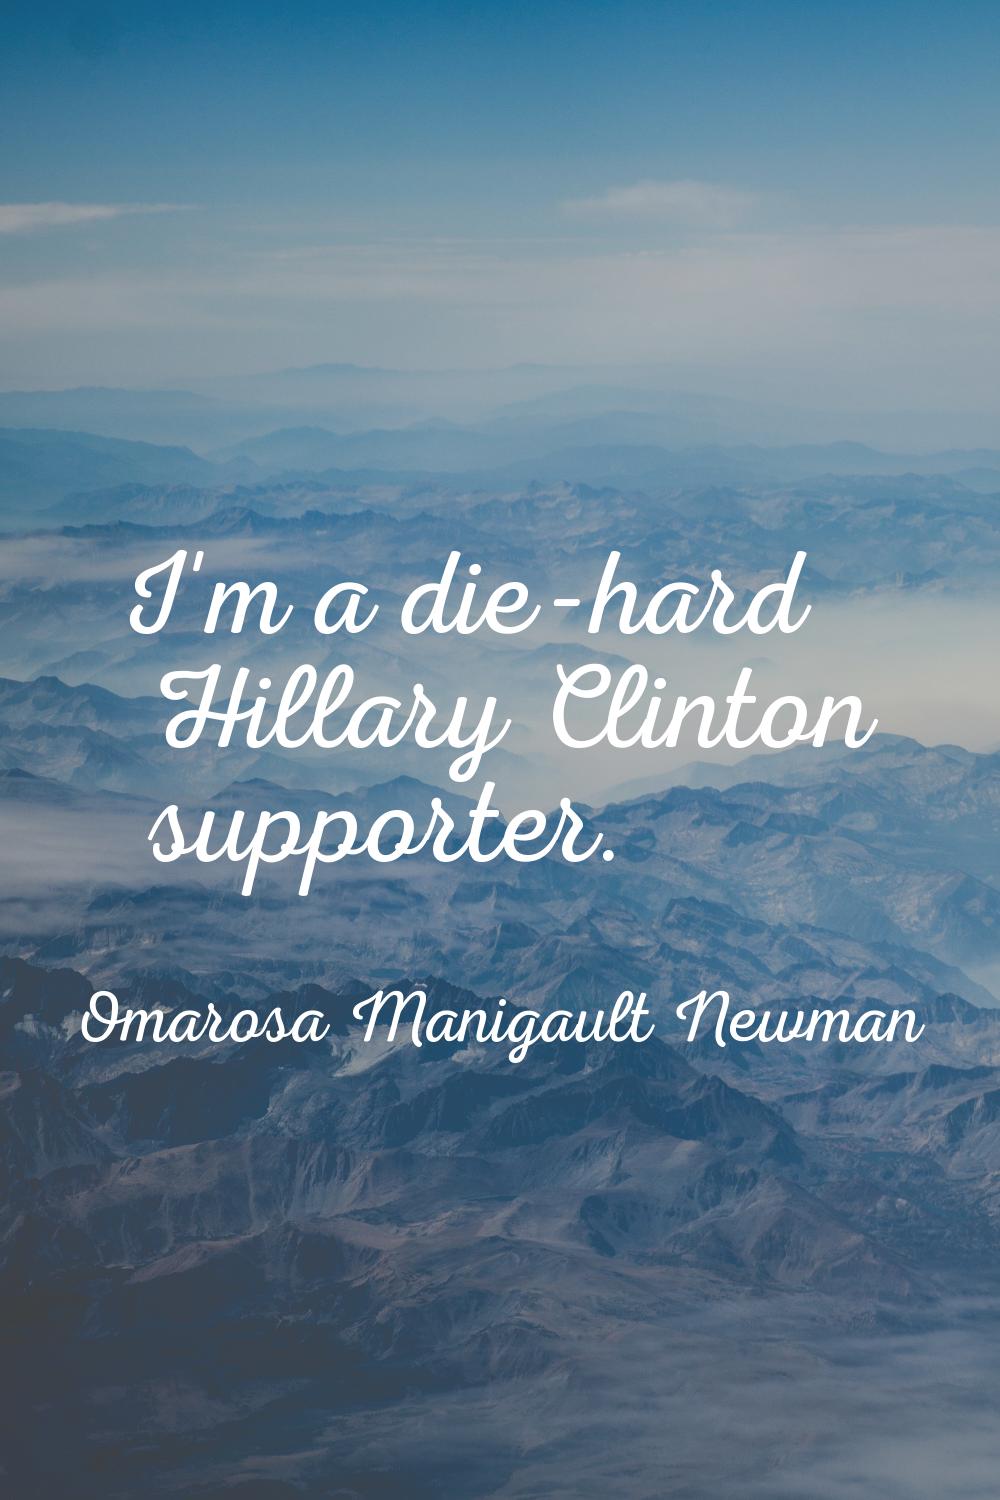 I'm a die-hard Hillary Clinton supporter.